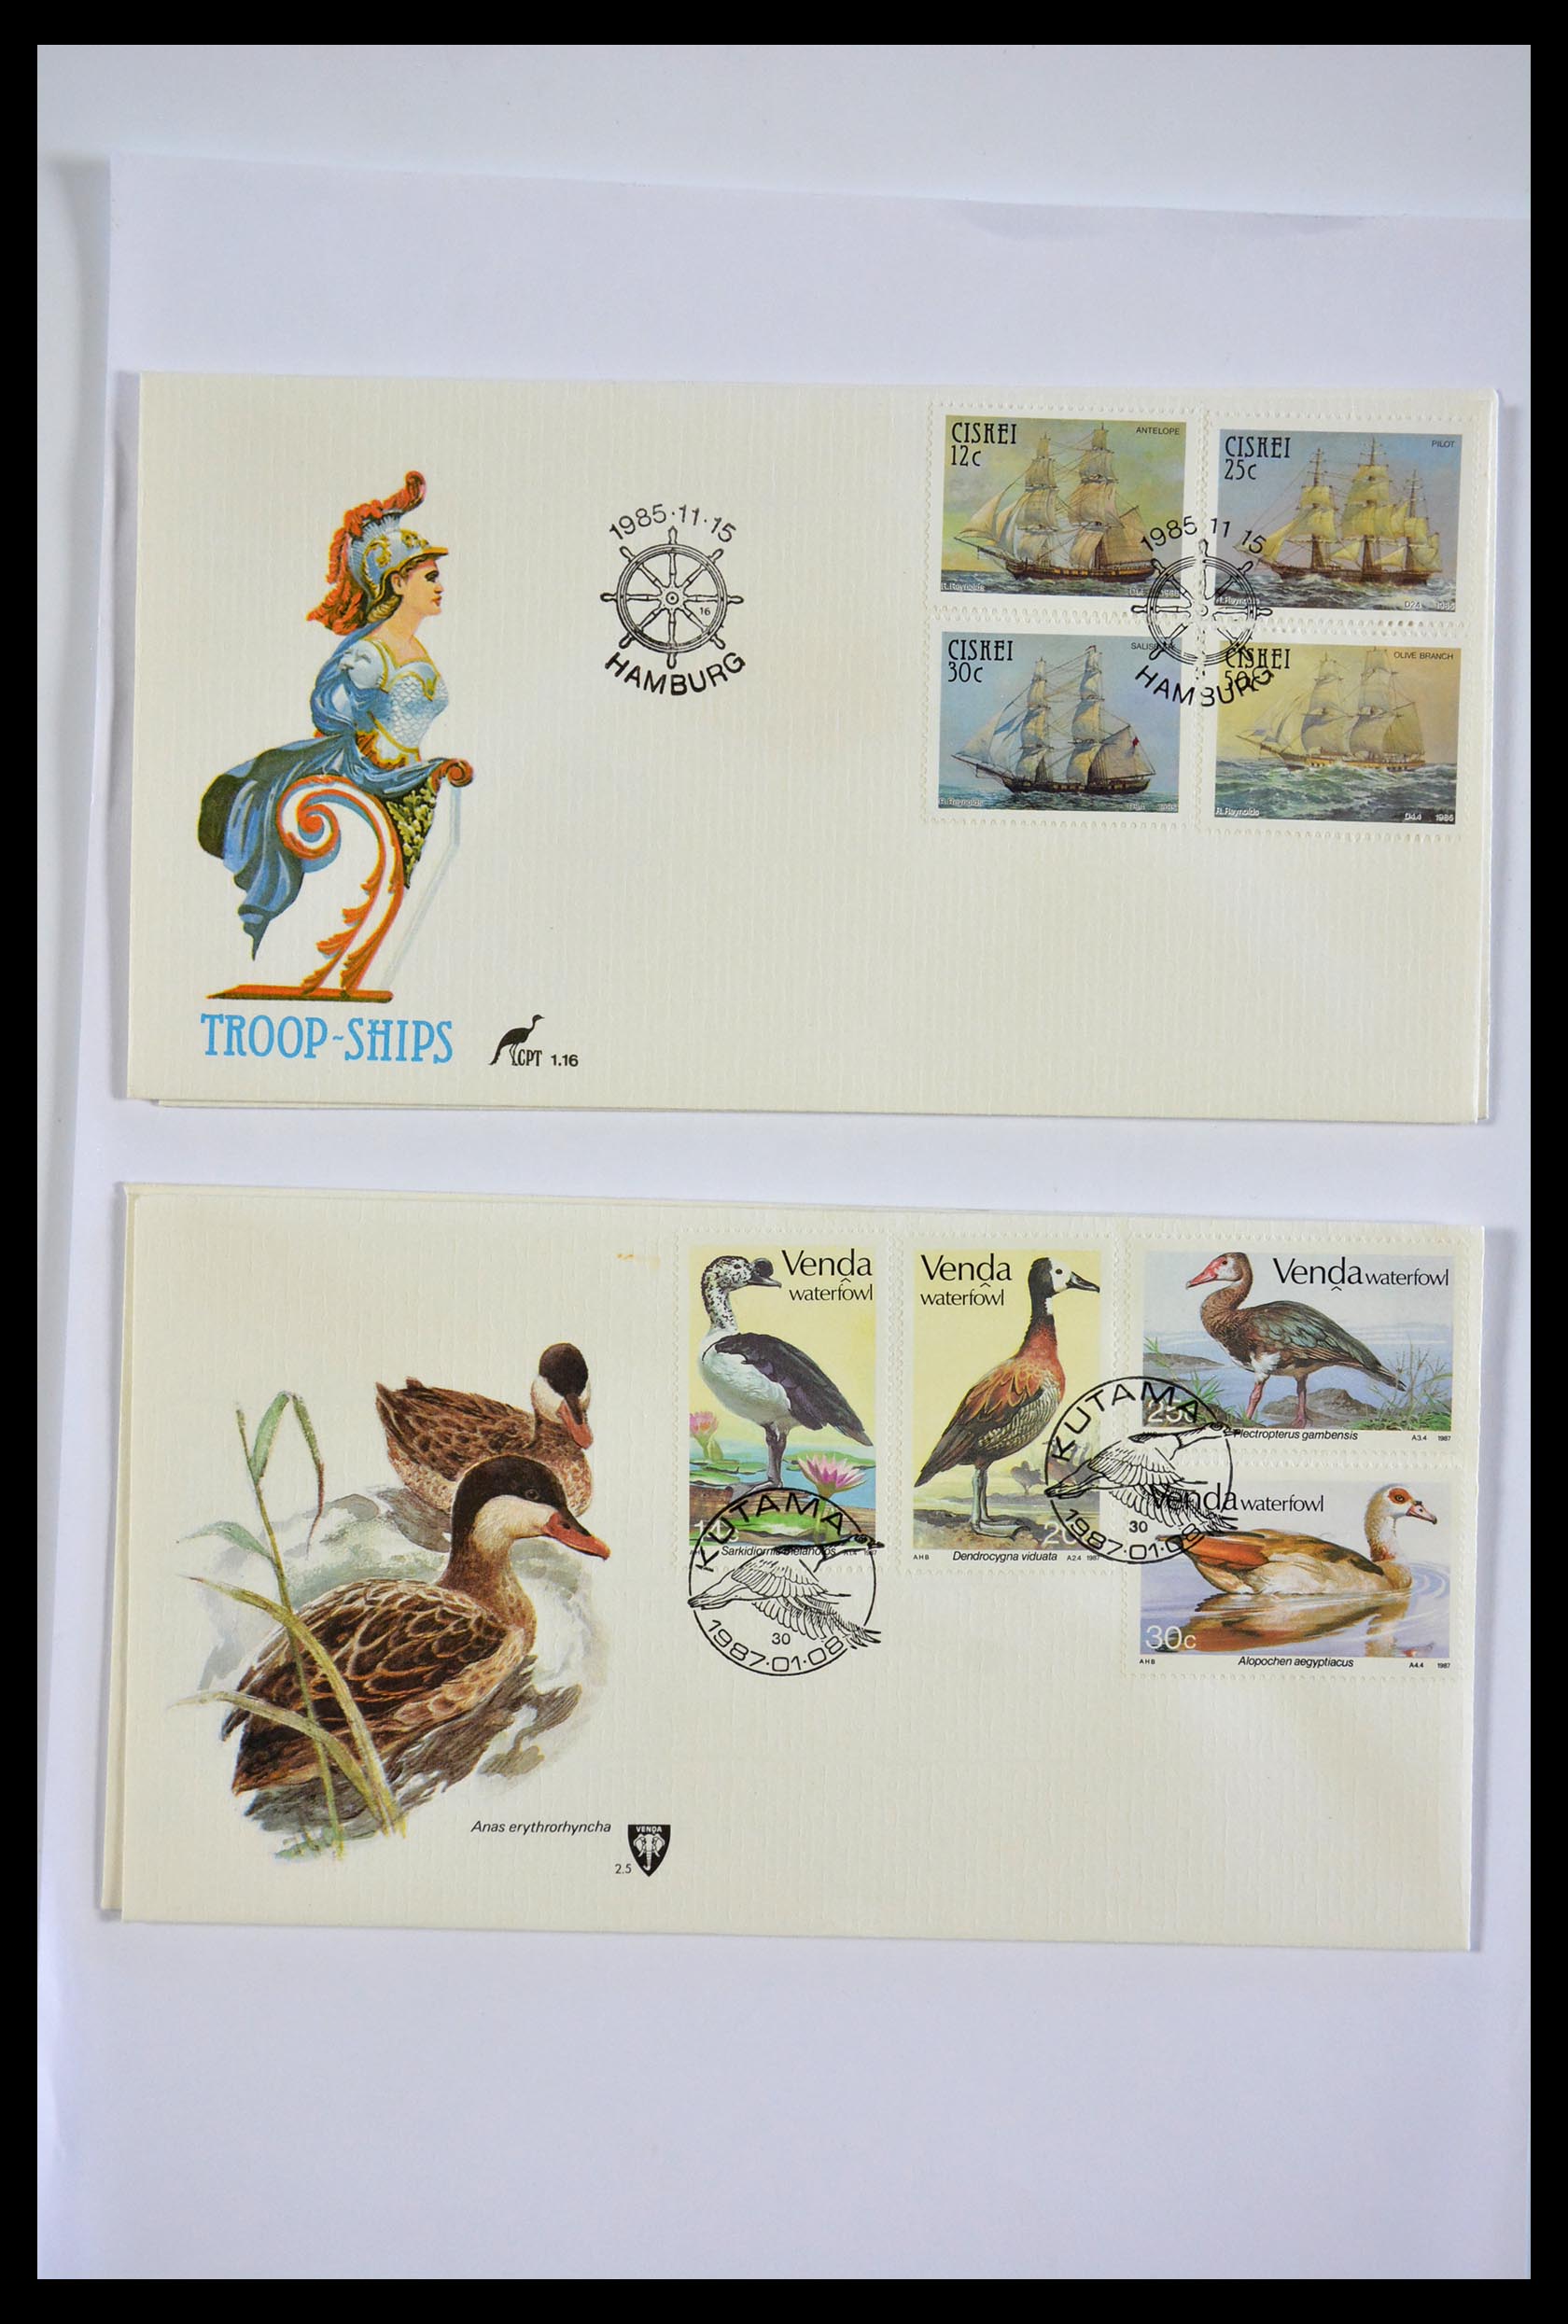 29356 592 - 29356 South Africa homelands first day covers 1979-1991.